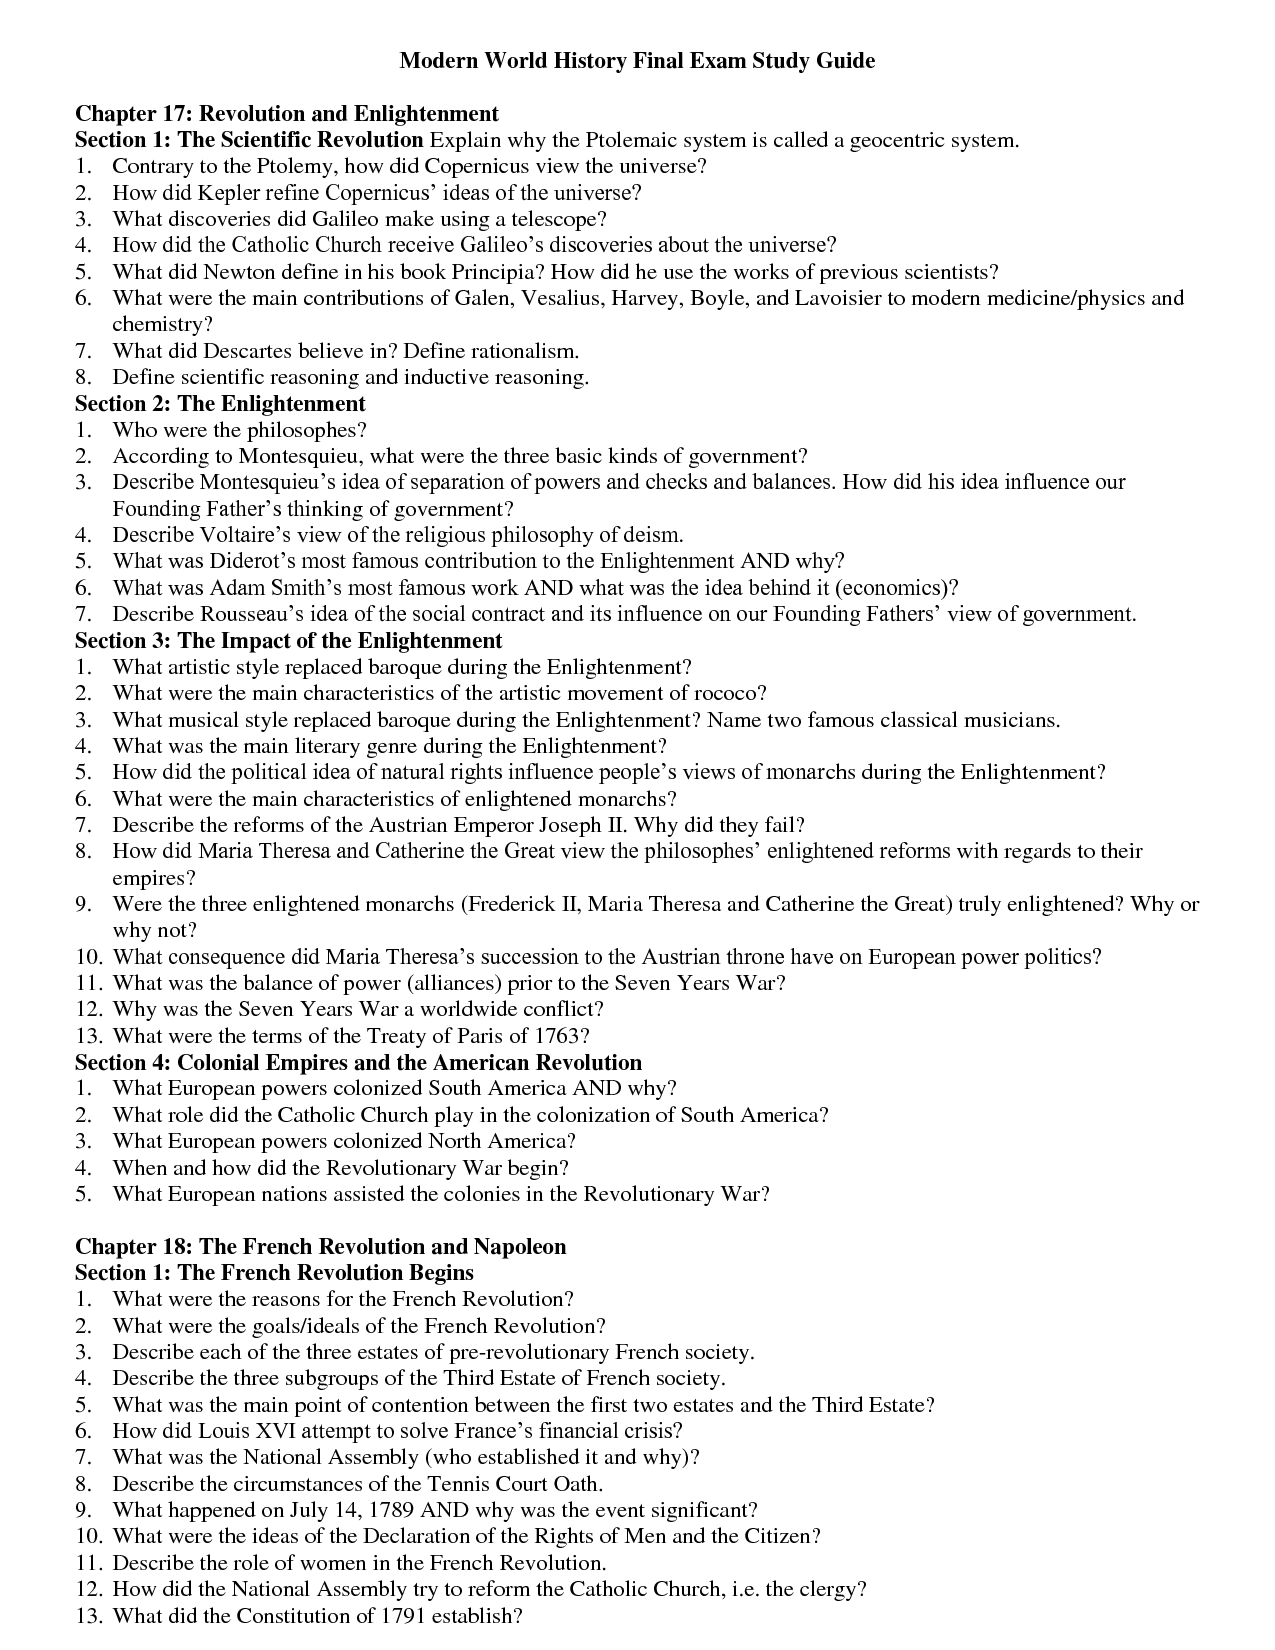 15 Best Images of Modern World History Questions Worksheets Egypt